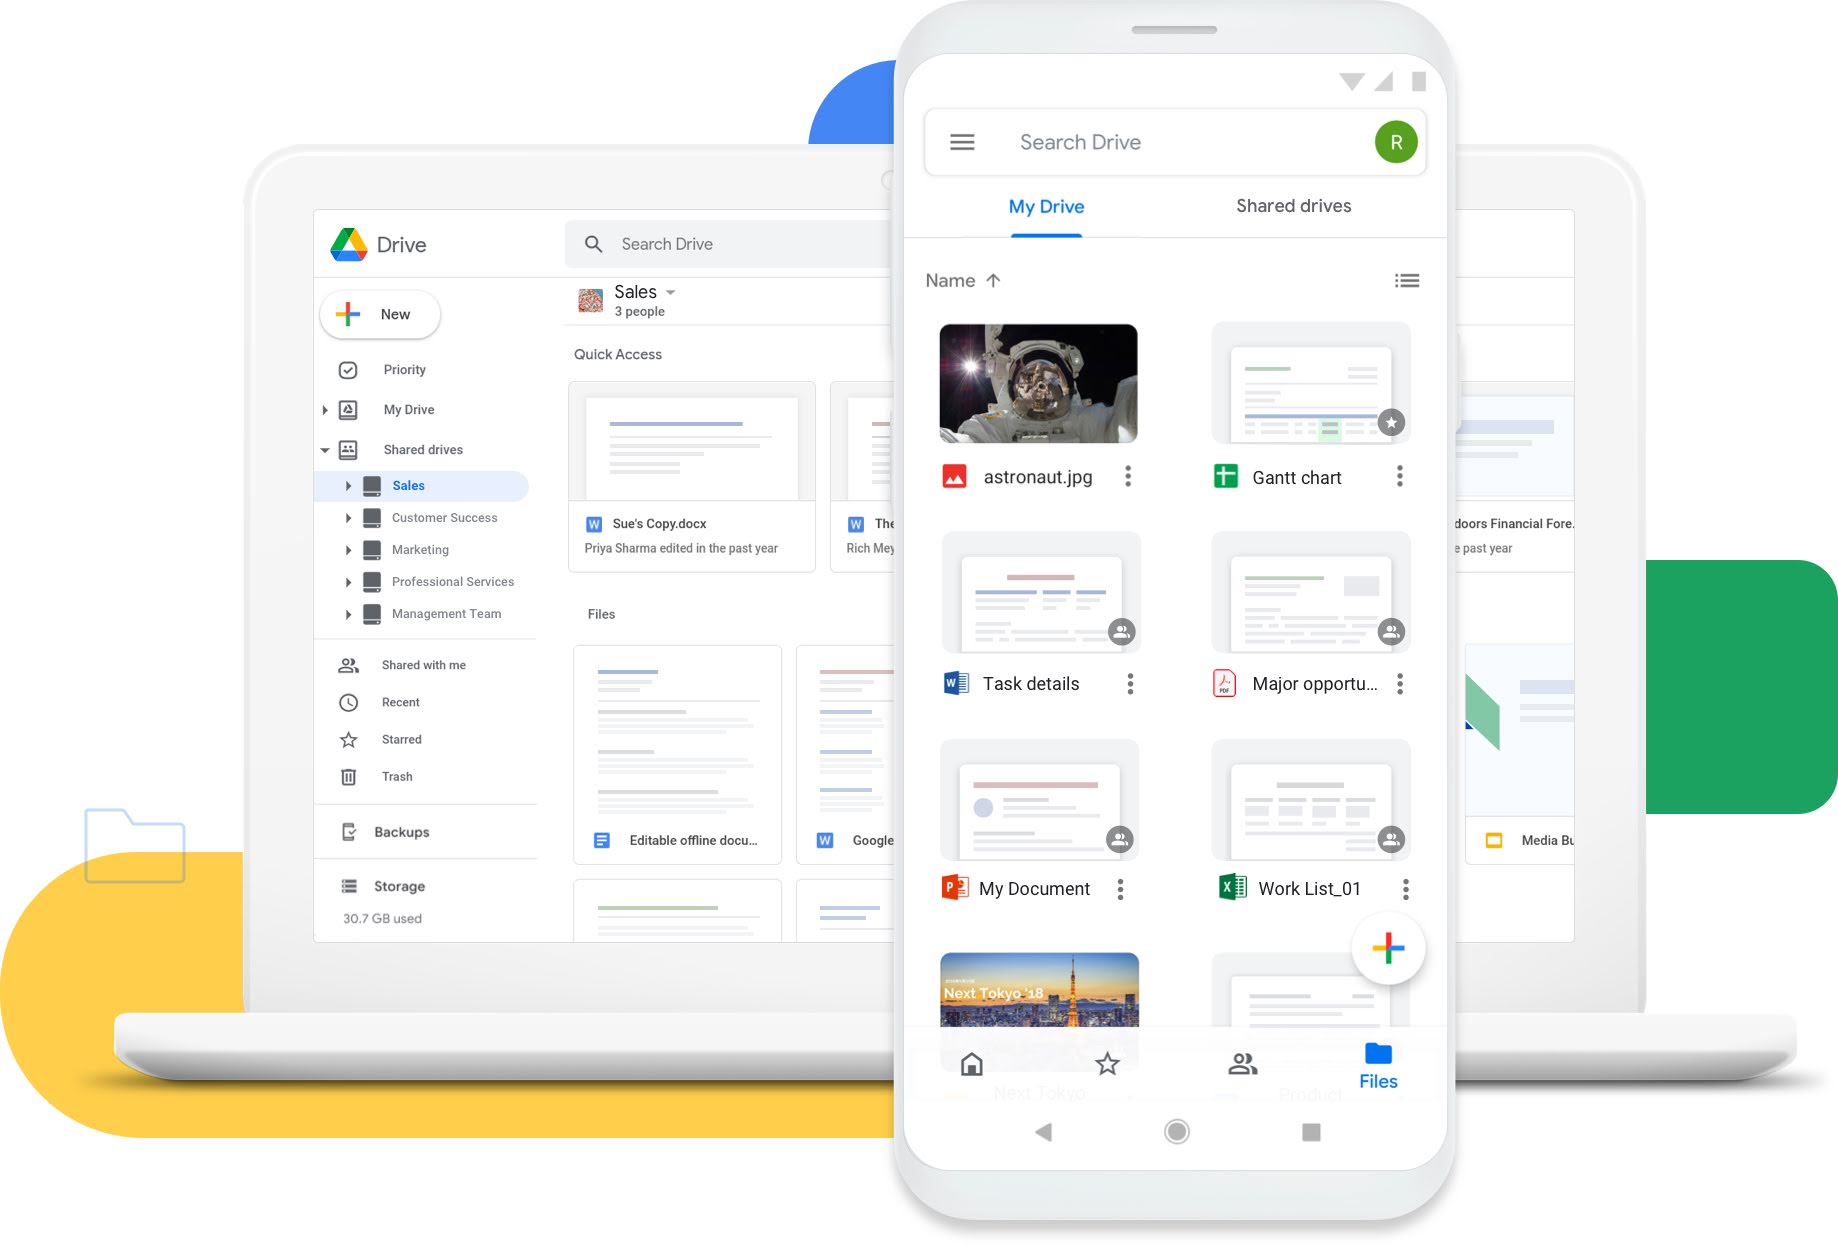 Google drive being used as a remote work software to store and collaborate on files from remote team members